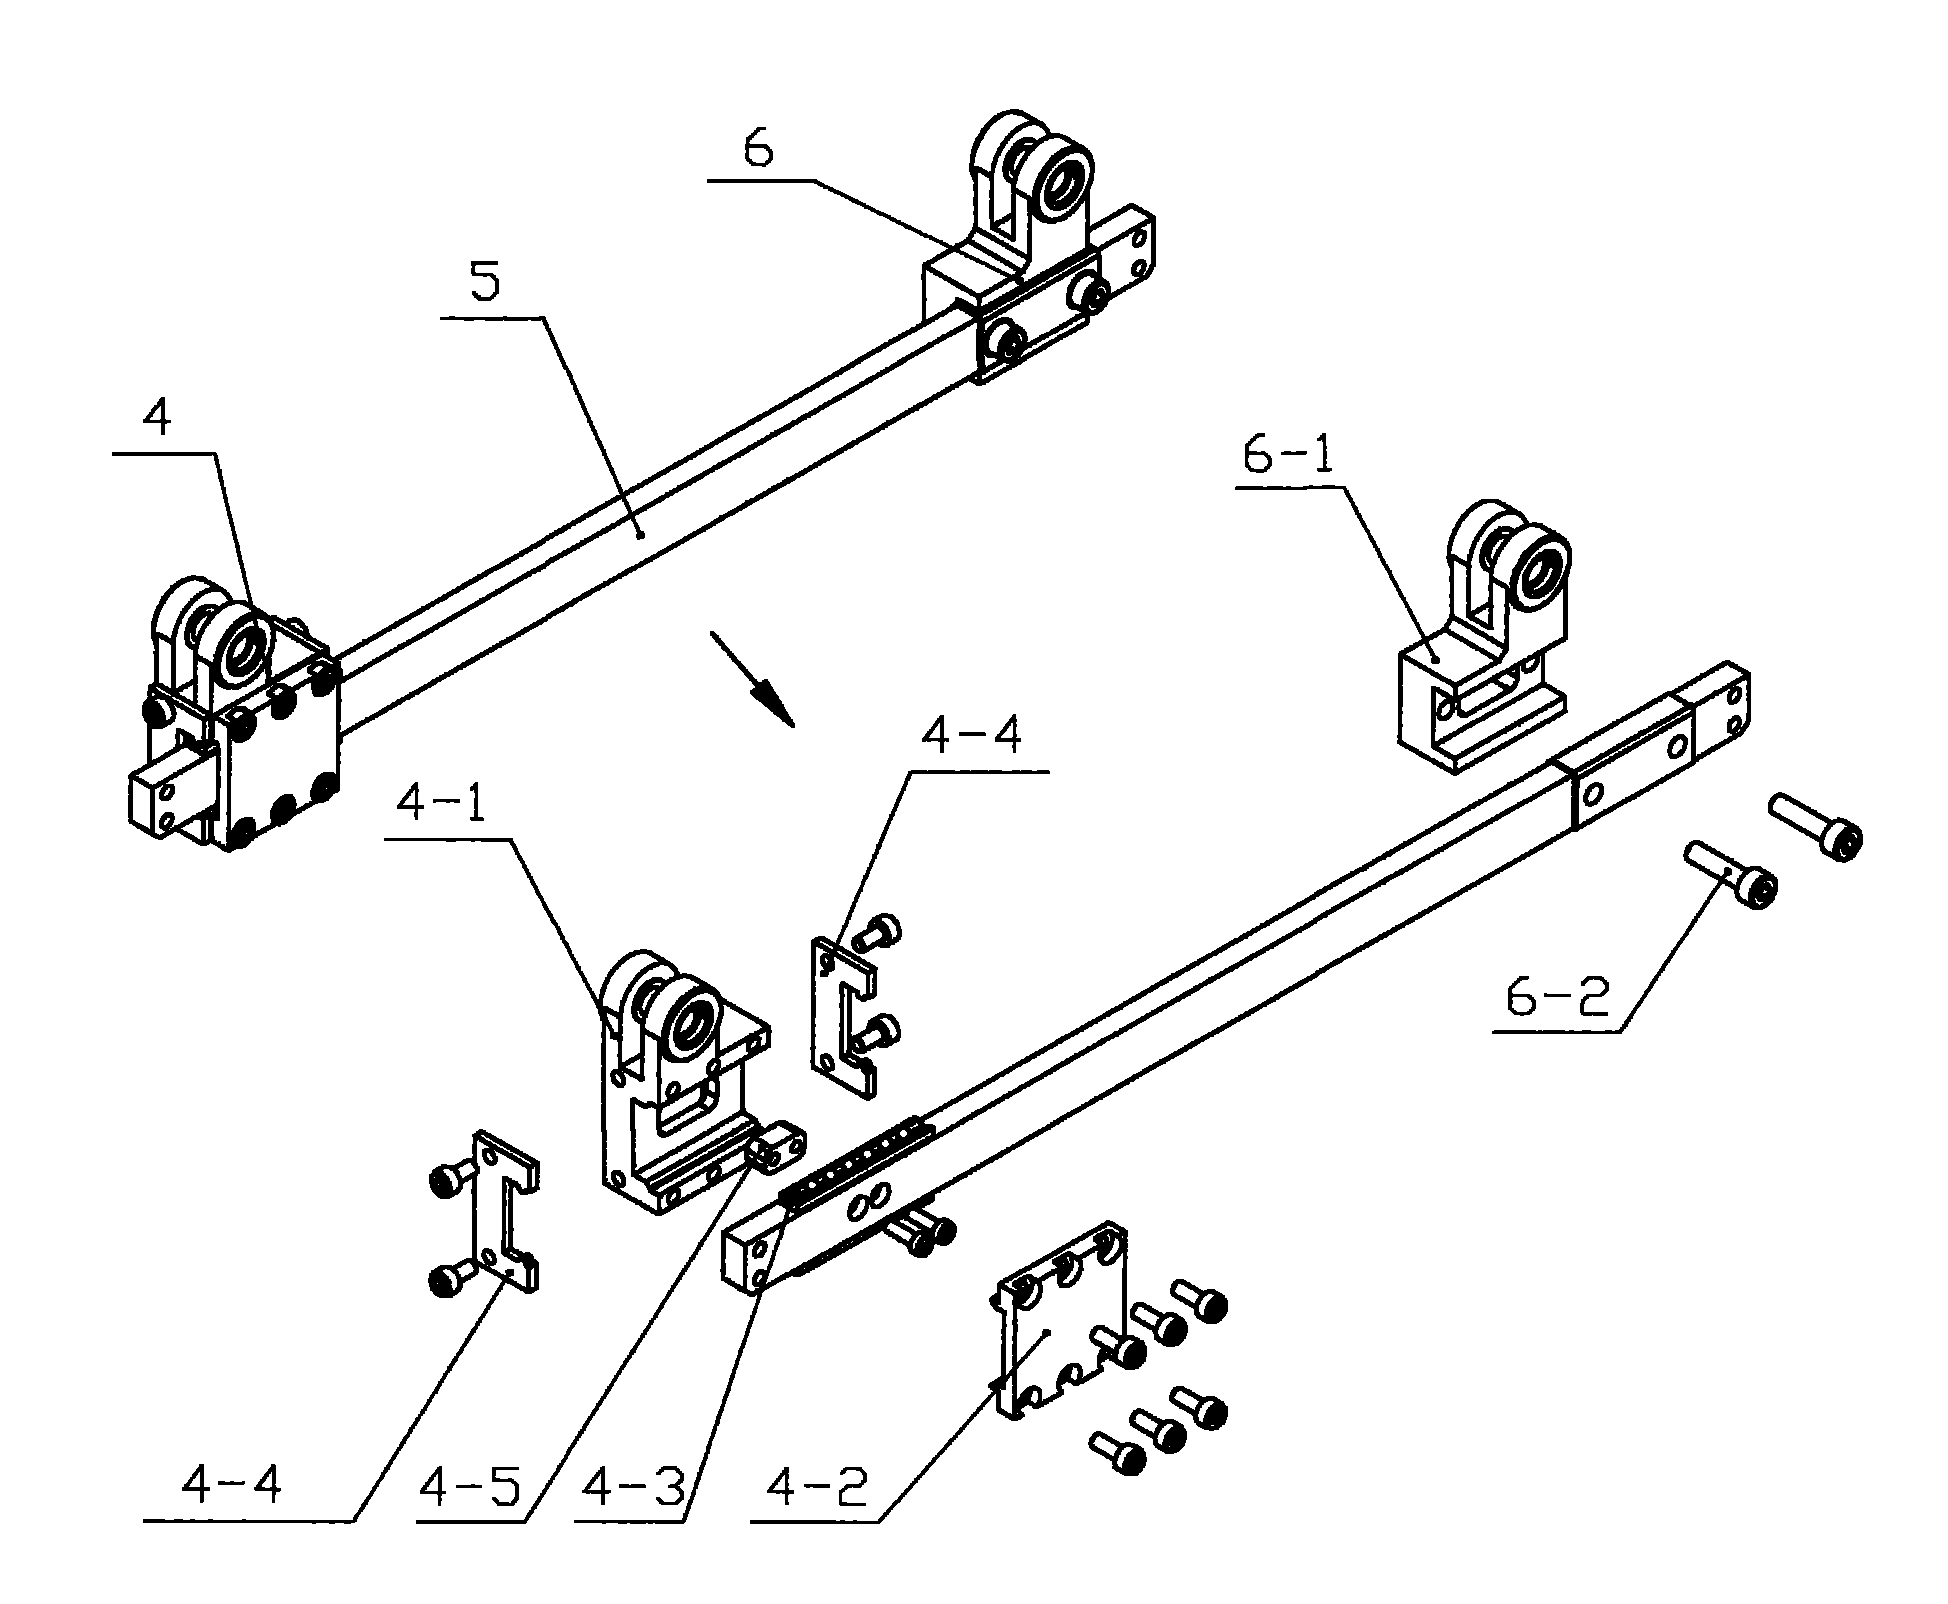 Three-way irrotational displacement absorber